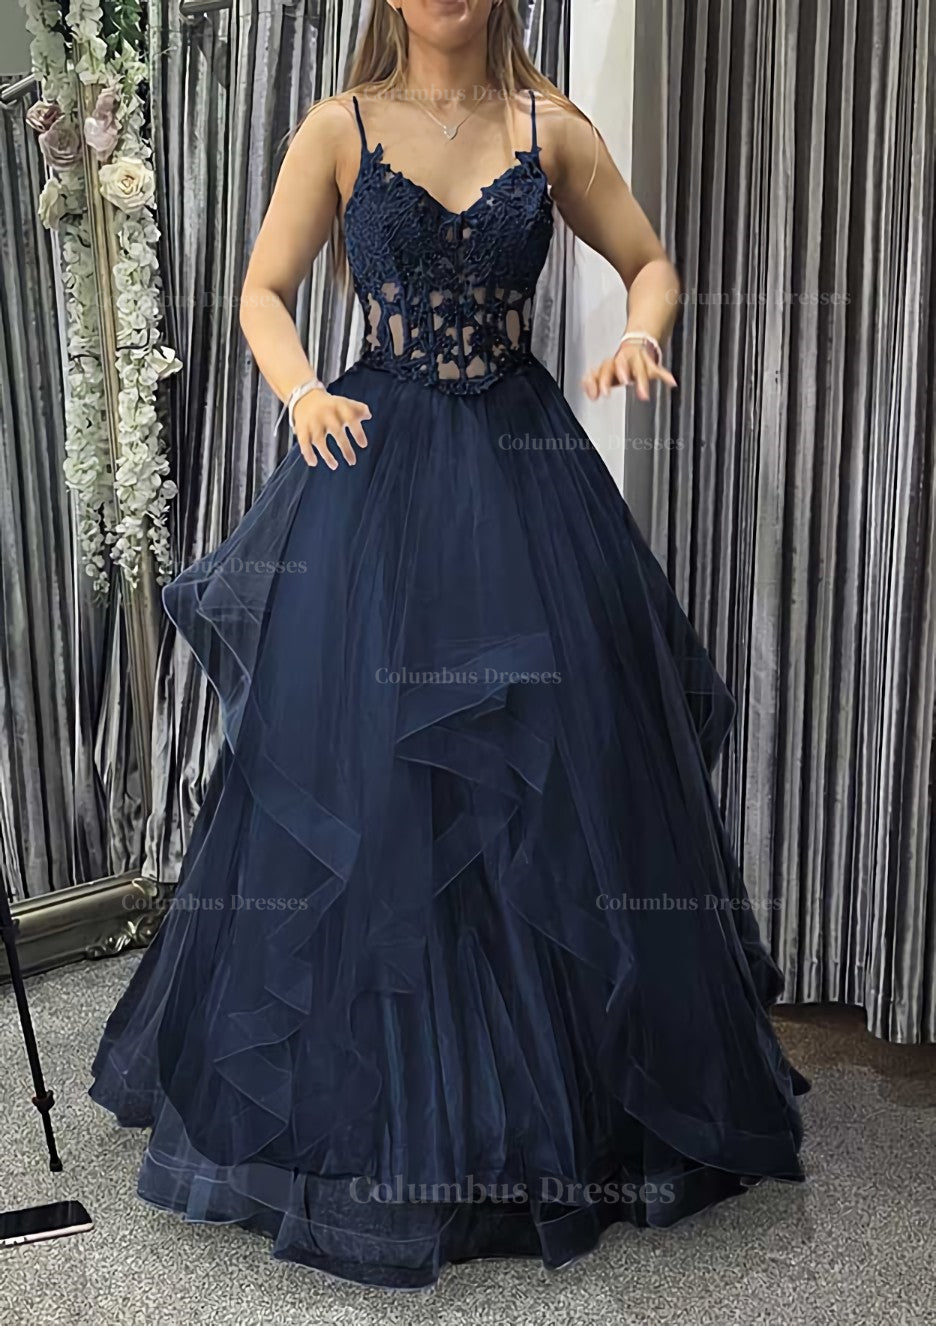 Party Dress Short Tight, A-line V Neck Sleeveless Long/Floor-Length Tulle Charmeuse Prom Dress With Appliqued Lace